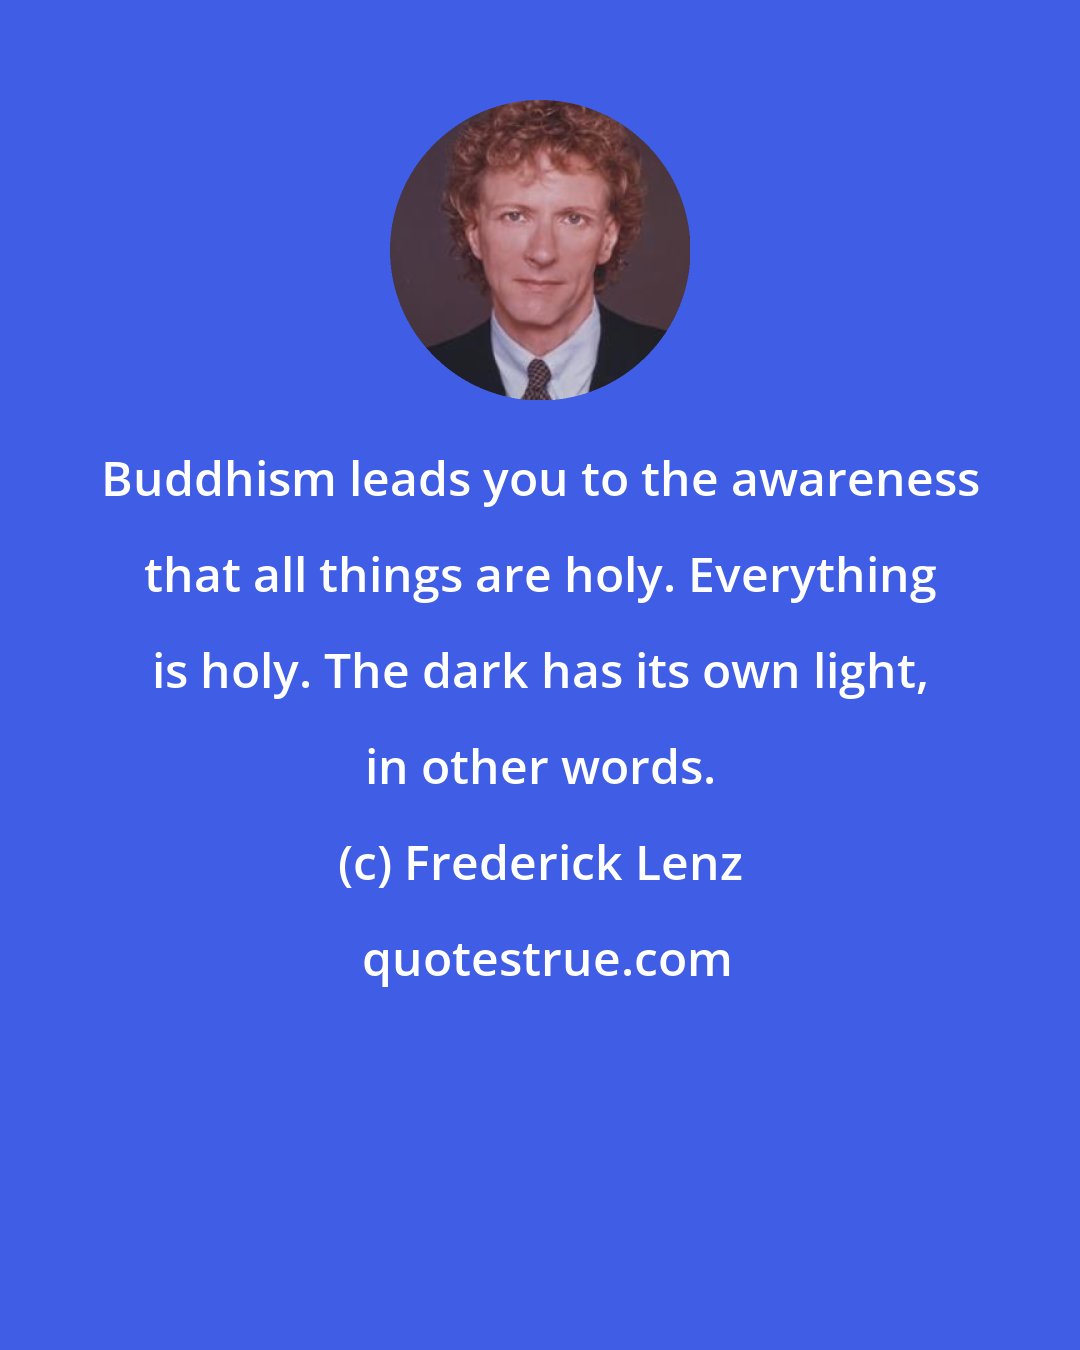 Frederick Lenz: Buddhism leads you to the awareness that all things are holy. Everything is holy. The dark has its own light, in other words.